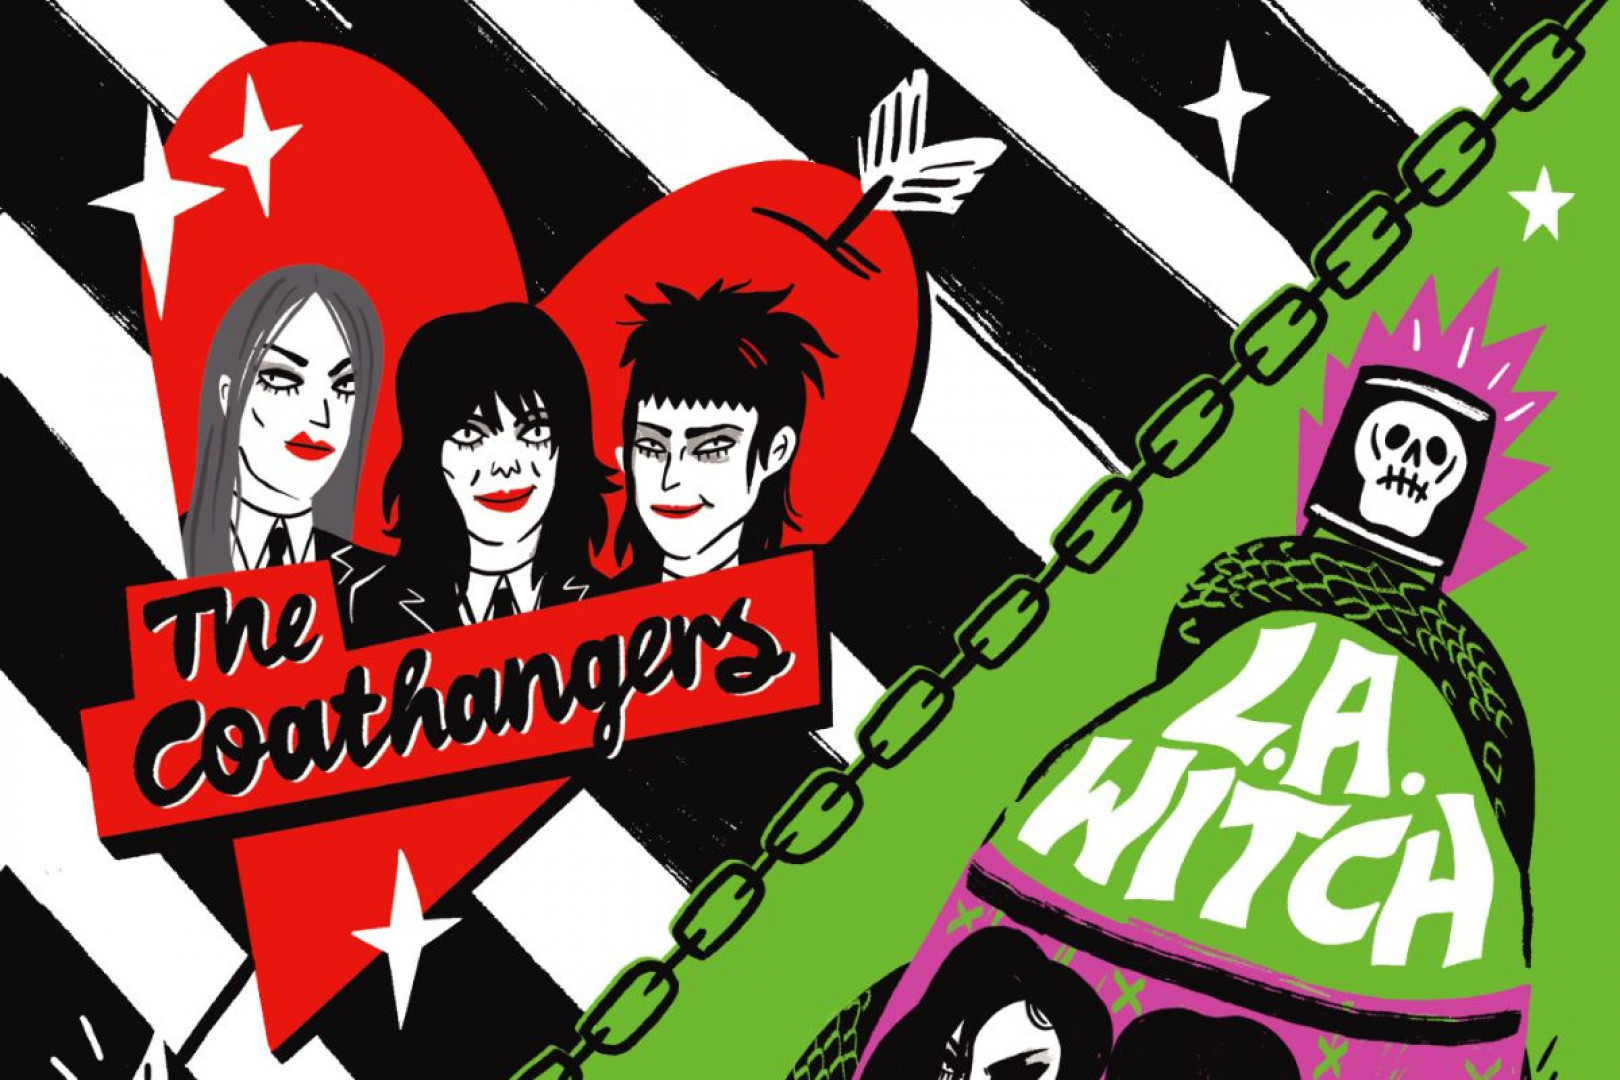 Coathangers and L.A. Witch to release split 7-inch